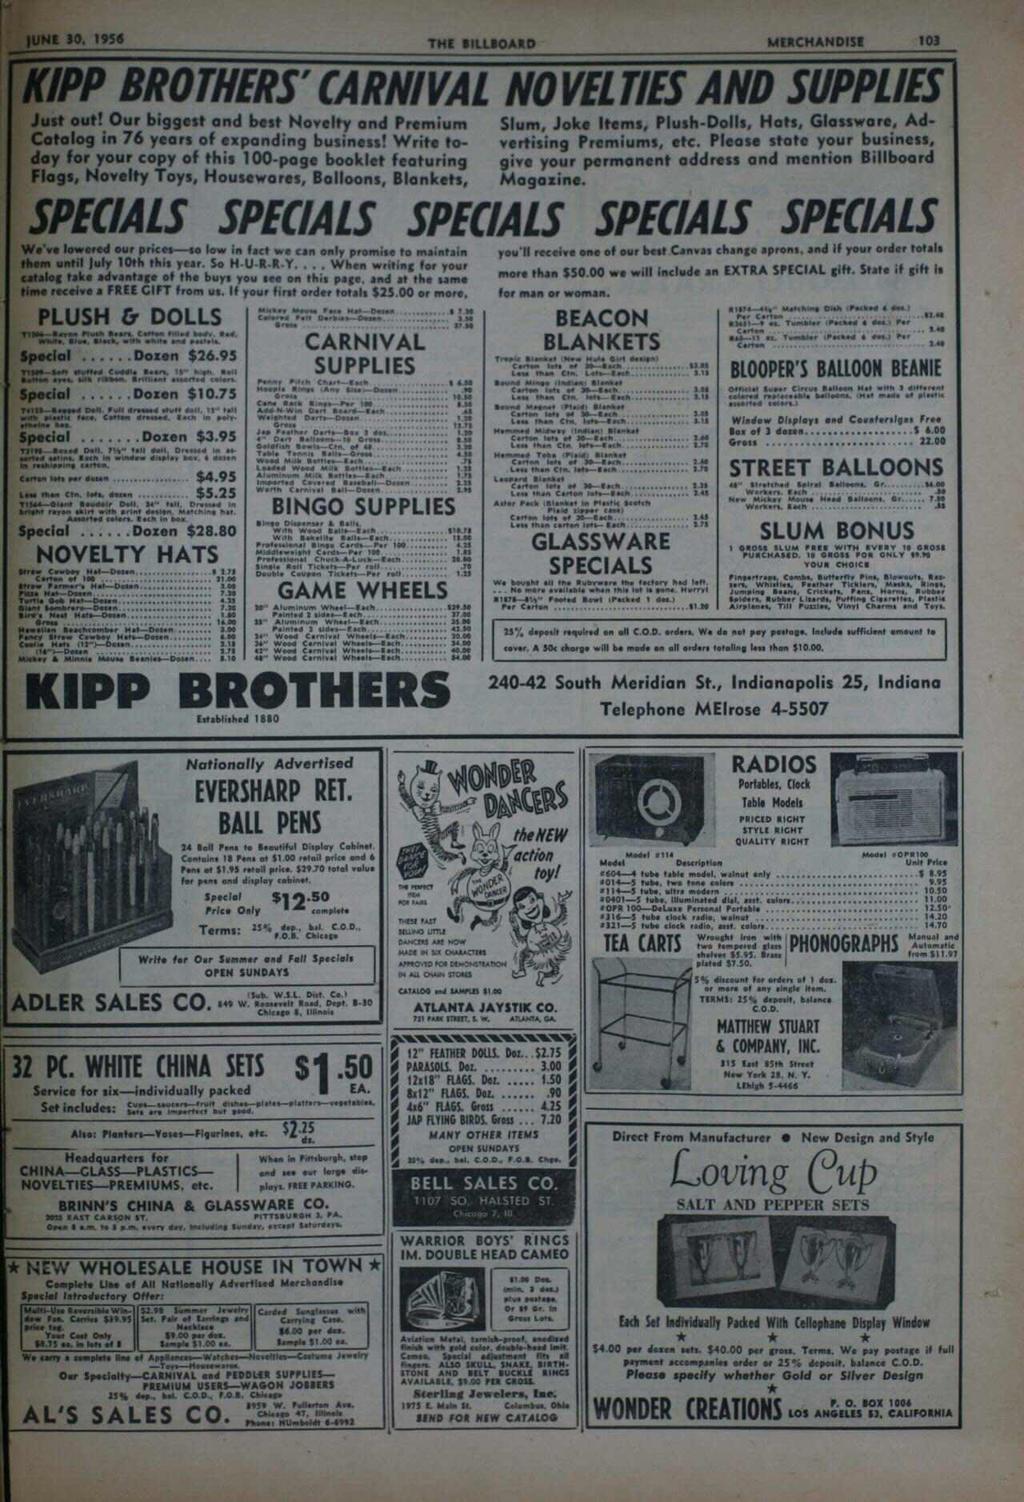 JUNE 30, 956 THE BLLBOARD MERCHANDSE 03 KPP BROTHERS' CARNVAL NOVELTES AND SUPPLES Just out! Our biggest and best Novelty and Premium Catalog in 76 years of expanding business!